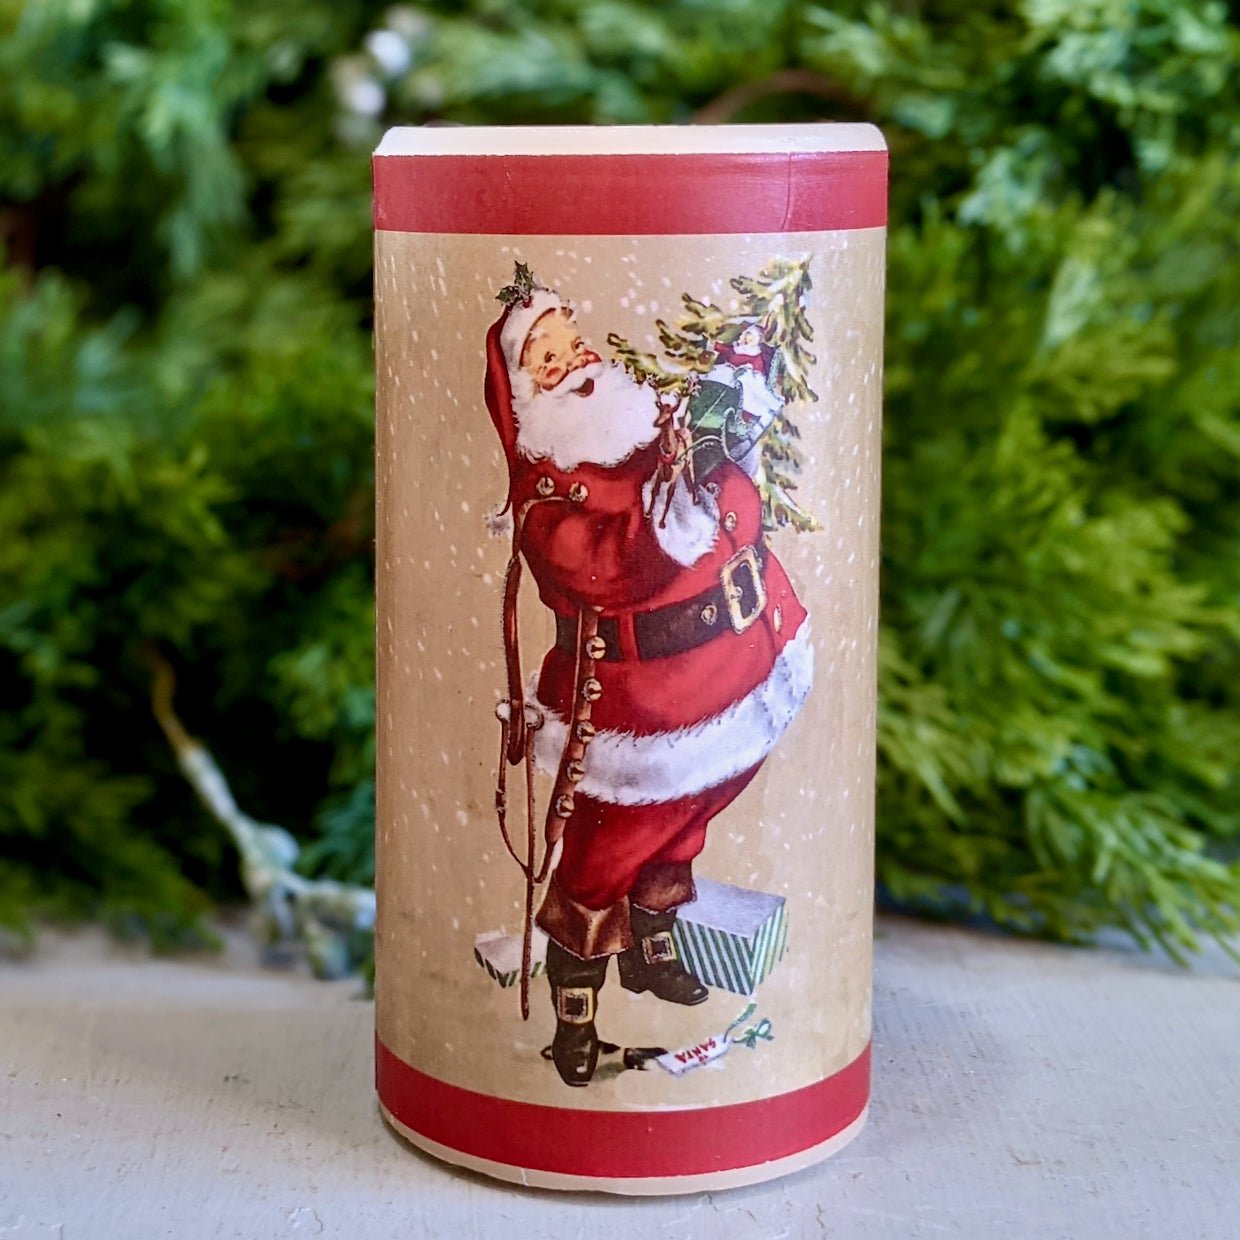 6” Battery Operated Pillar Candle Vintage-style Santa with Christmas Tree & Toys - Marmalade Mercantile